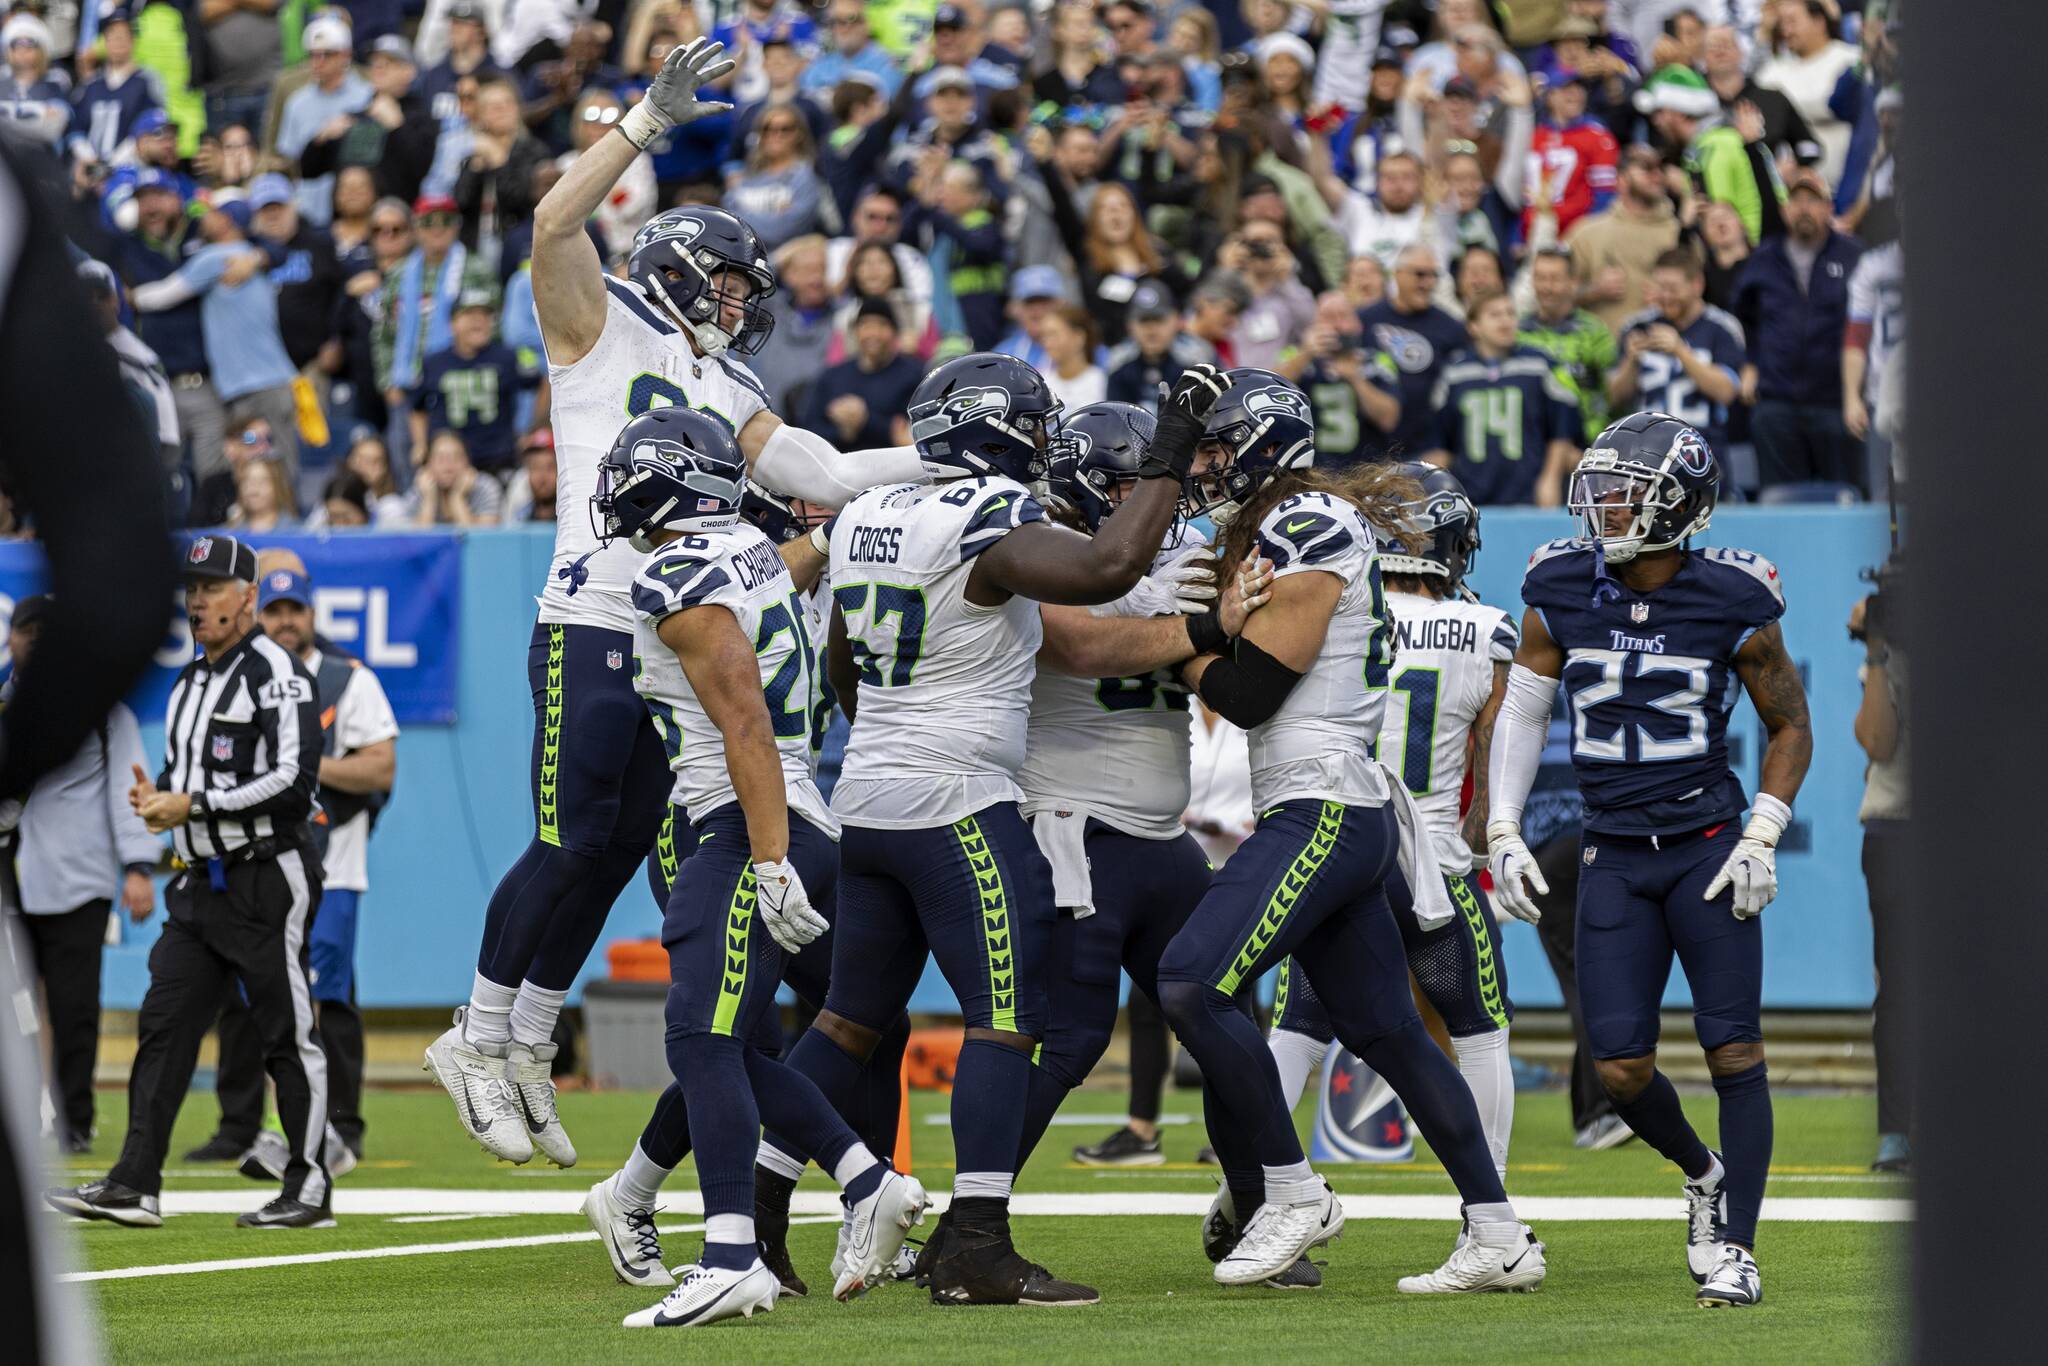 Seattle Seahawk players celebrate the game-wining touchdown with tight end Colby Parkinson (84) as Tennessee Titans cornerback Tre Avery (23) walks away during their game Sunday in Nashville, Tenn. (AP Photo/Wade Payne)